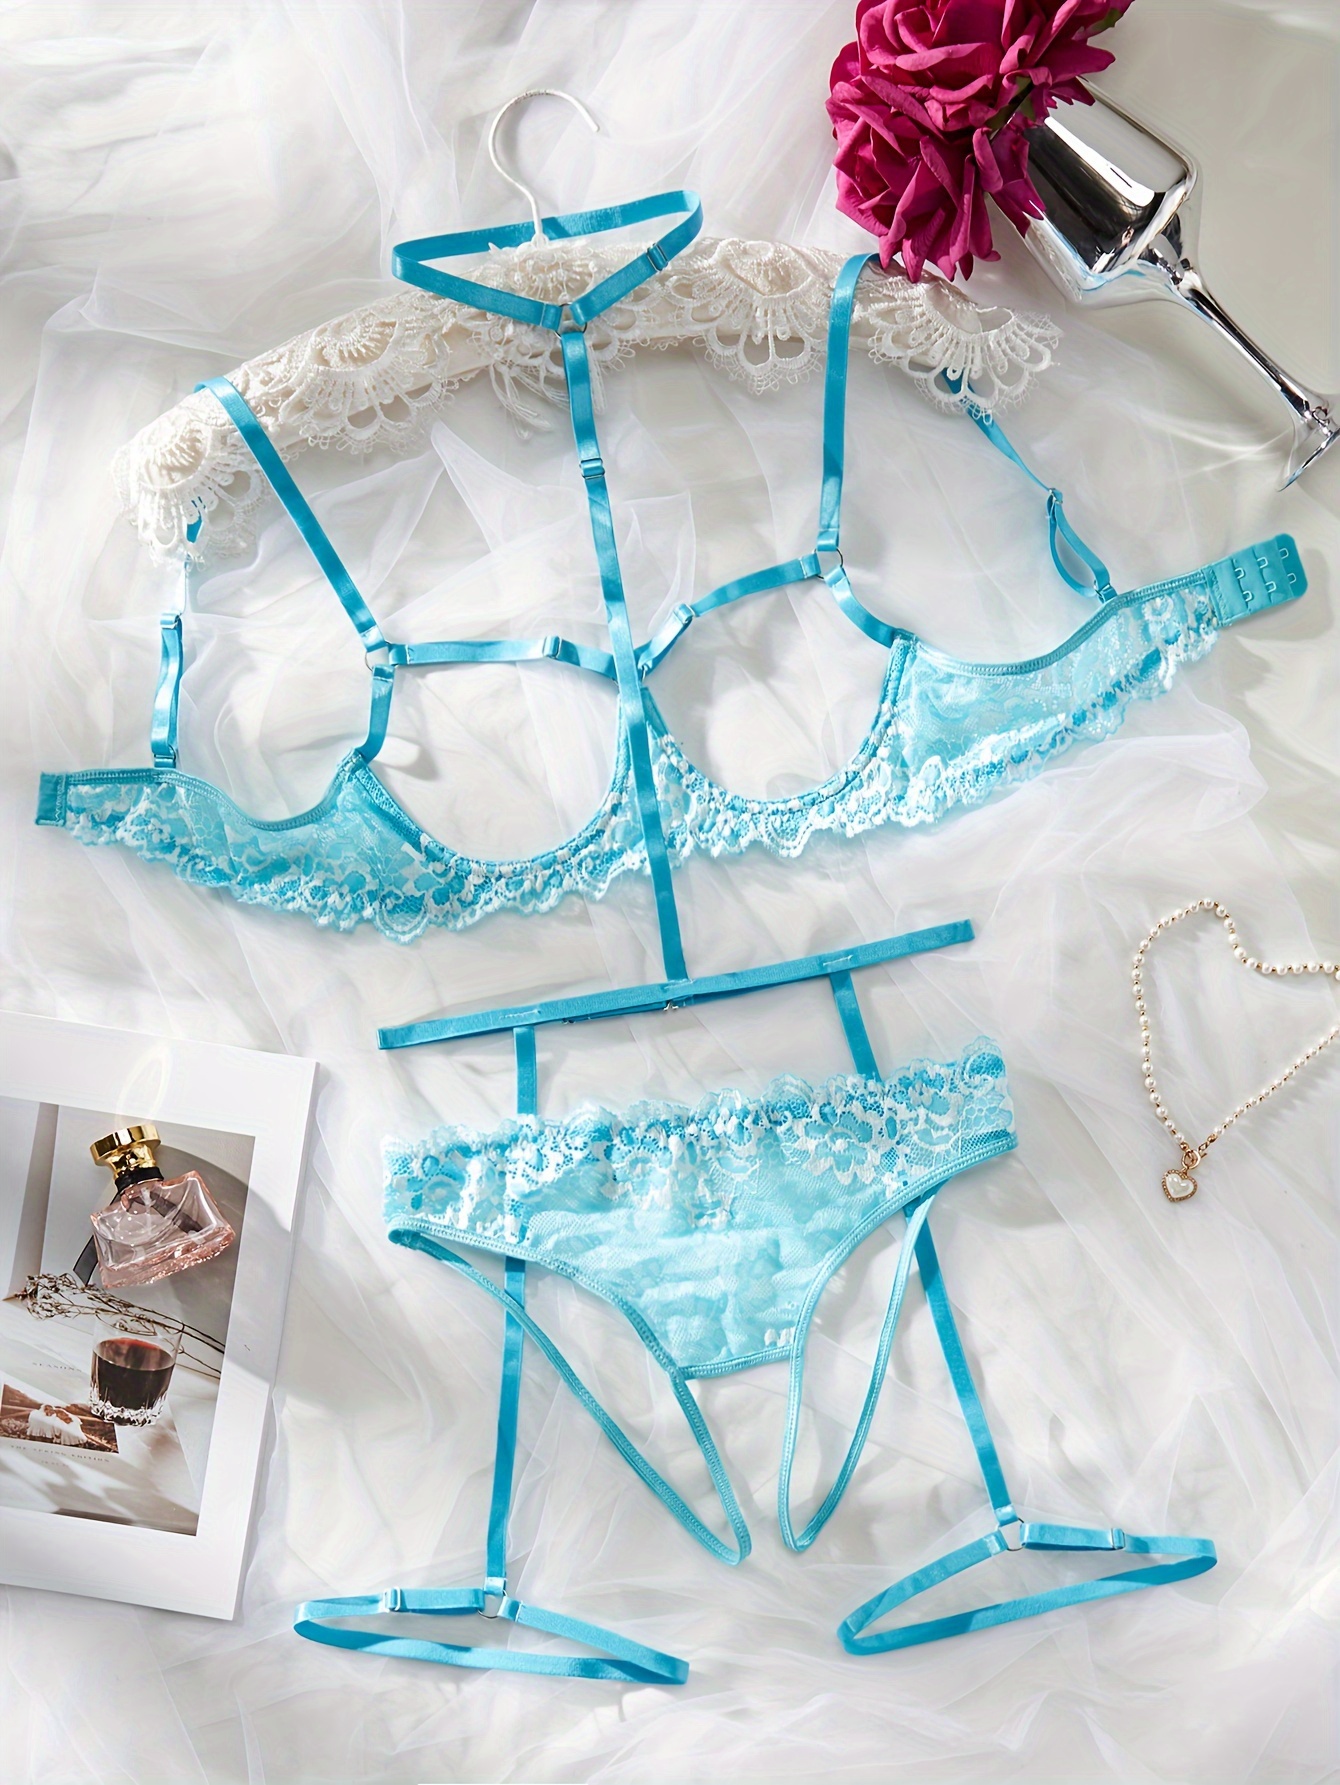  Women Lingerie Sexy Sets with Garter Belt Exposed